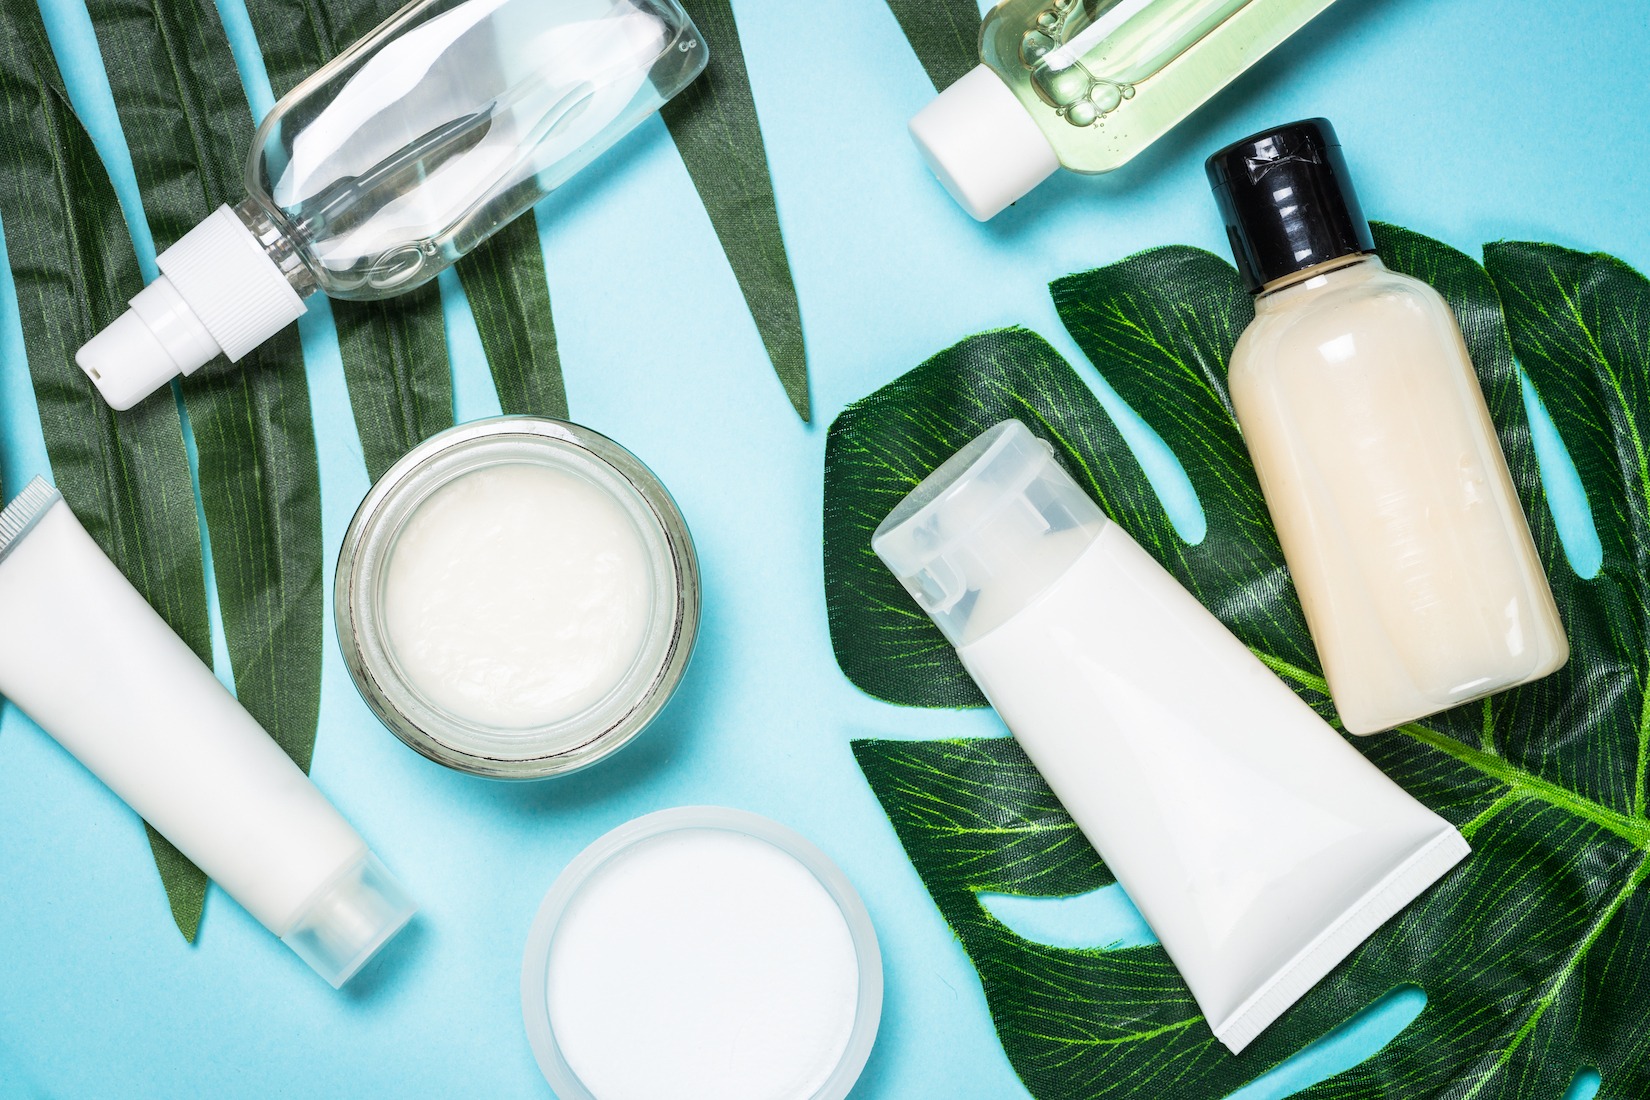 Skin care product, natural cosmetic, cream, tonic, lotion with green leaves. Flat lay image on blue.